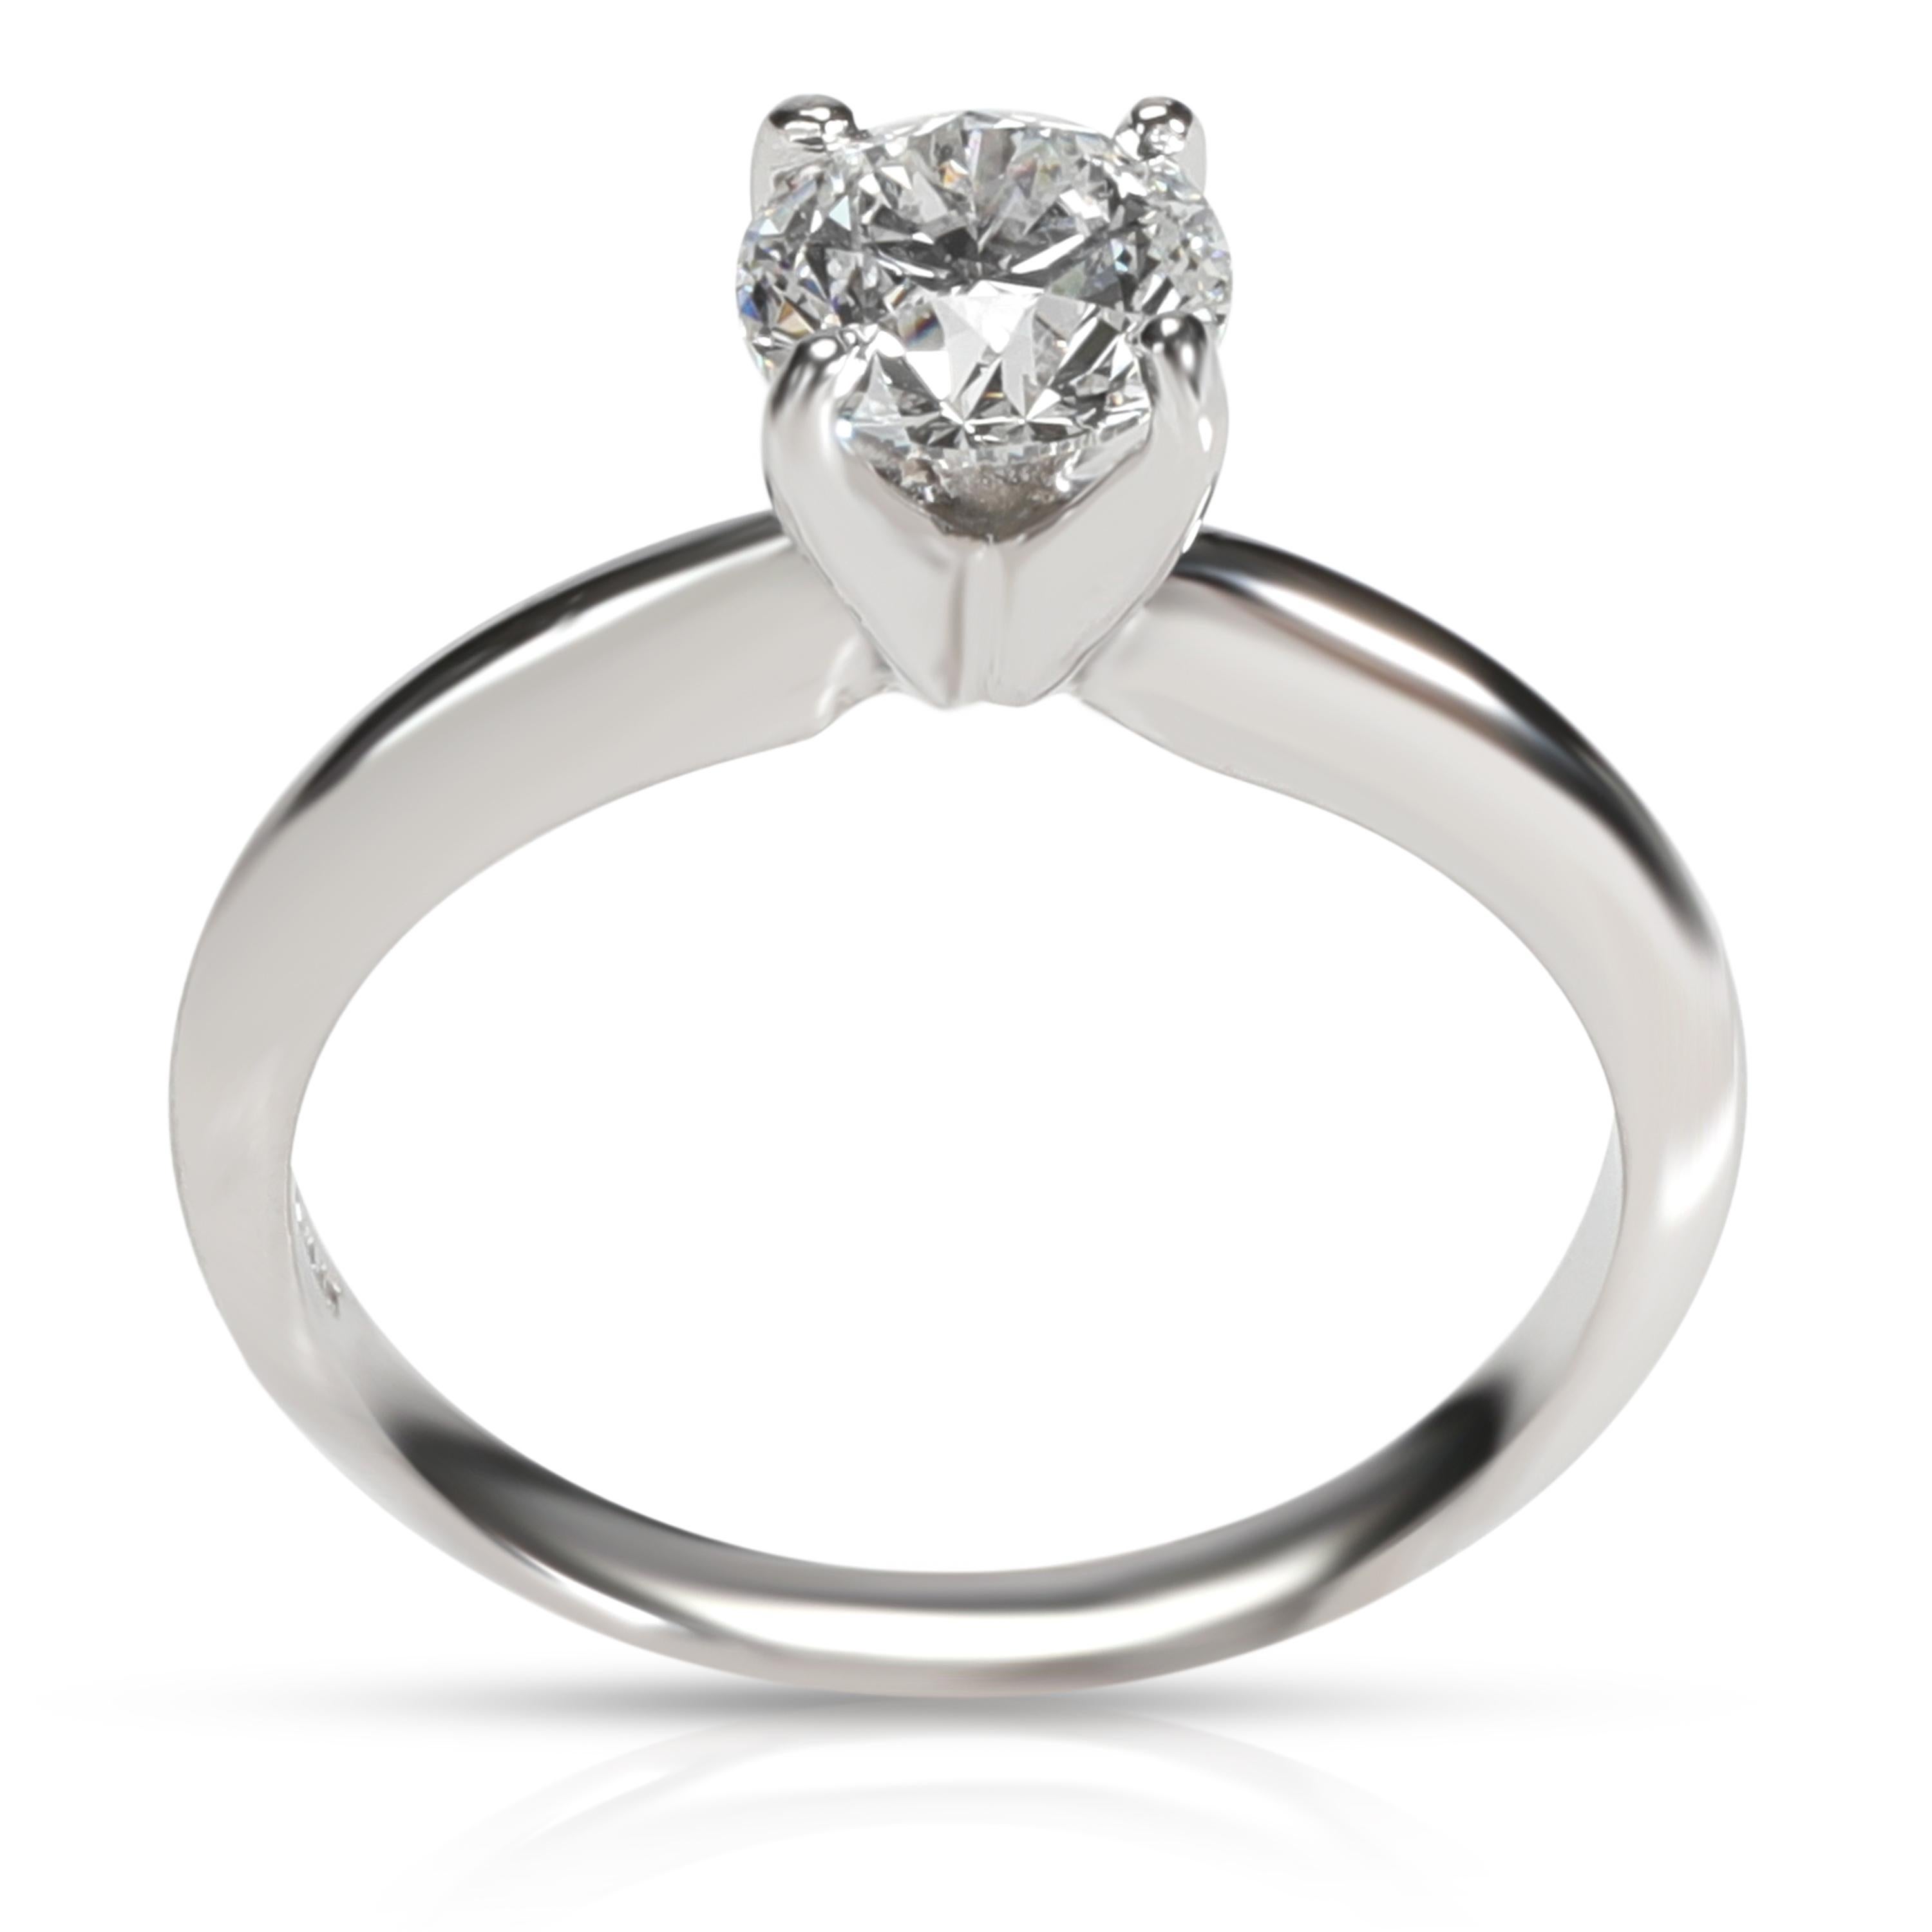 

Forevermark Solitaire Diamond Ring in Platinum E SI1 0.9 CTW

PRIMARY DETAILS
SKU: 106698
Listing Title: Forevermark Solitaire Diamond Ring in Platinum E SI1 0.9 CTW
Condition Description: Retails for 6,000 USD. In excellent condition and recently